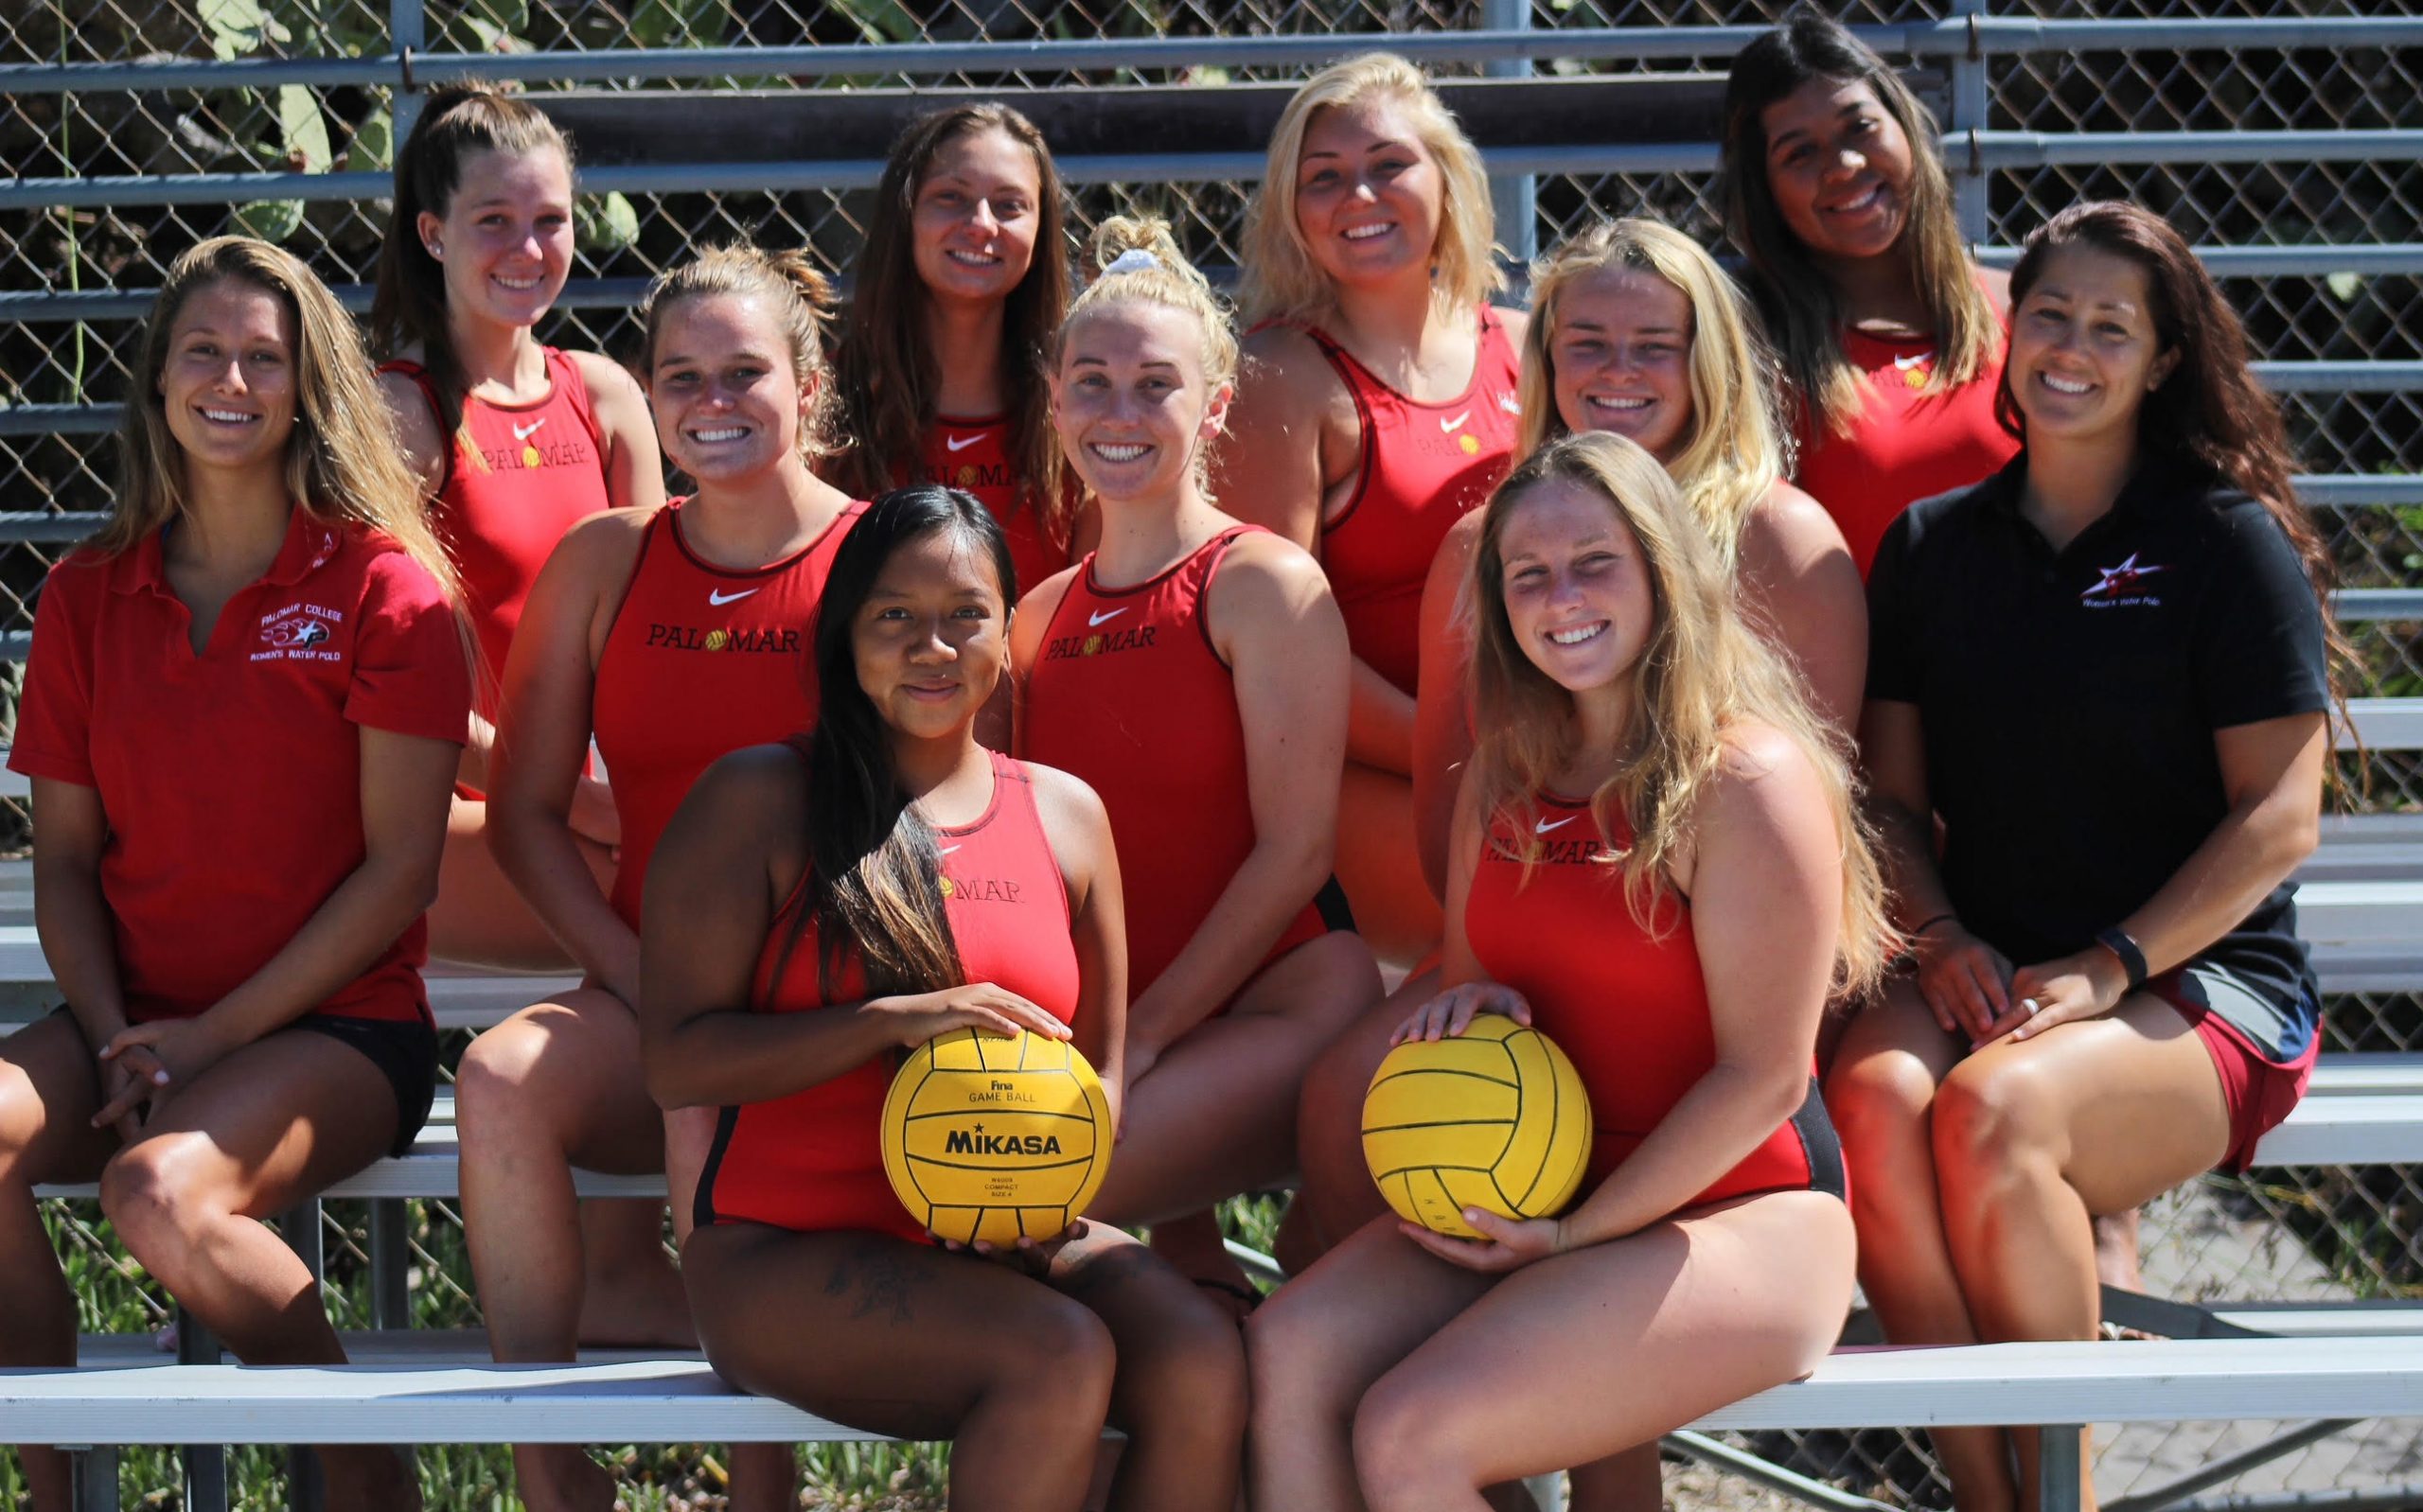 Ten team members of the Palomar water polo team sit together on metal bleachers with their coach on the right. The two in the front each hold a yellow water polo ball.